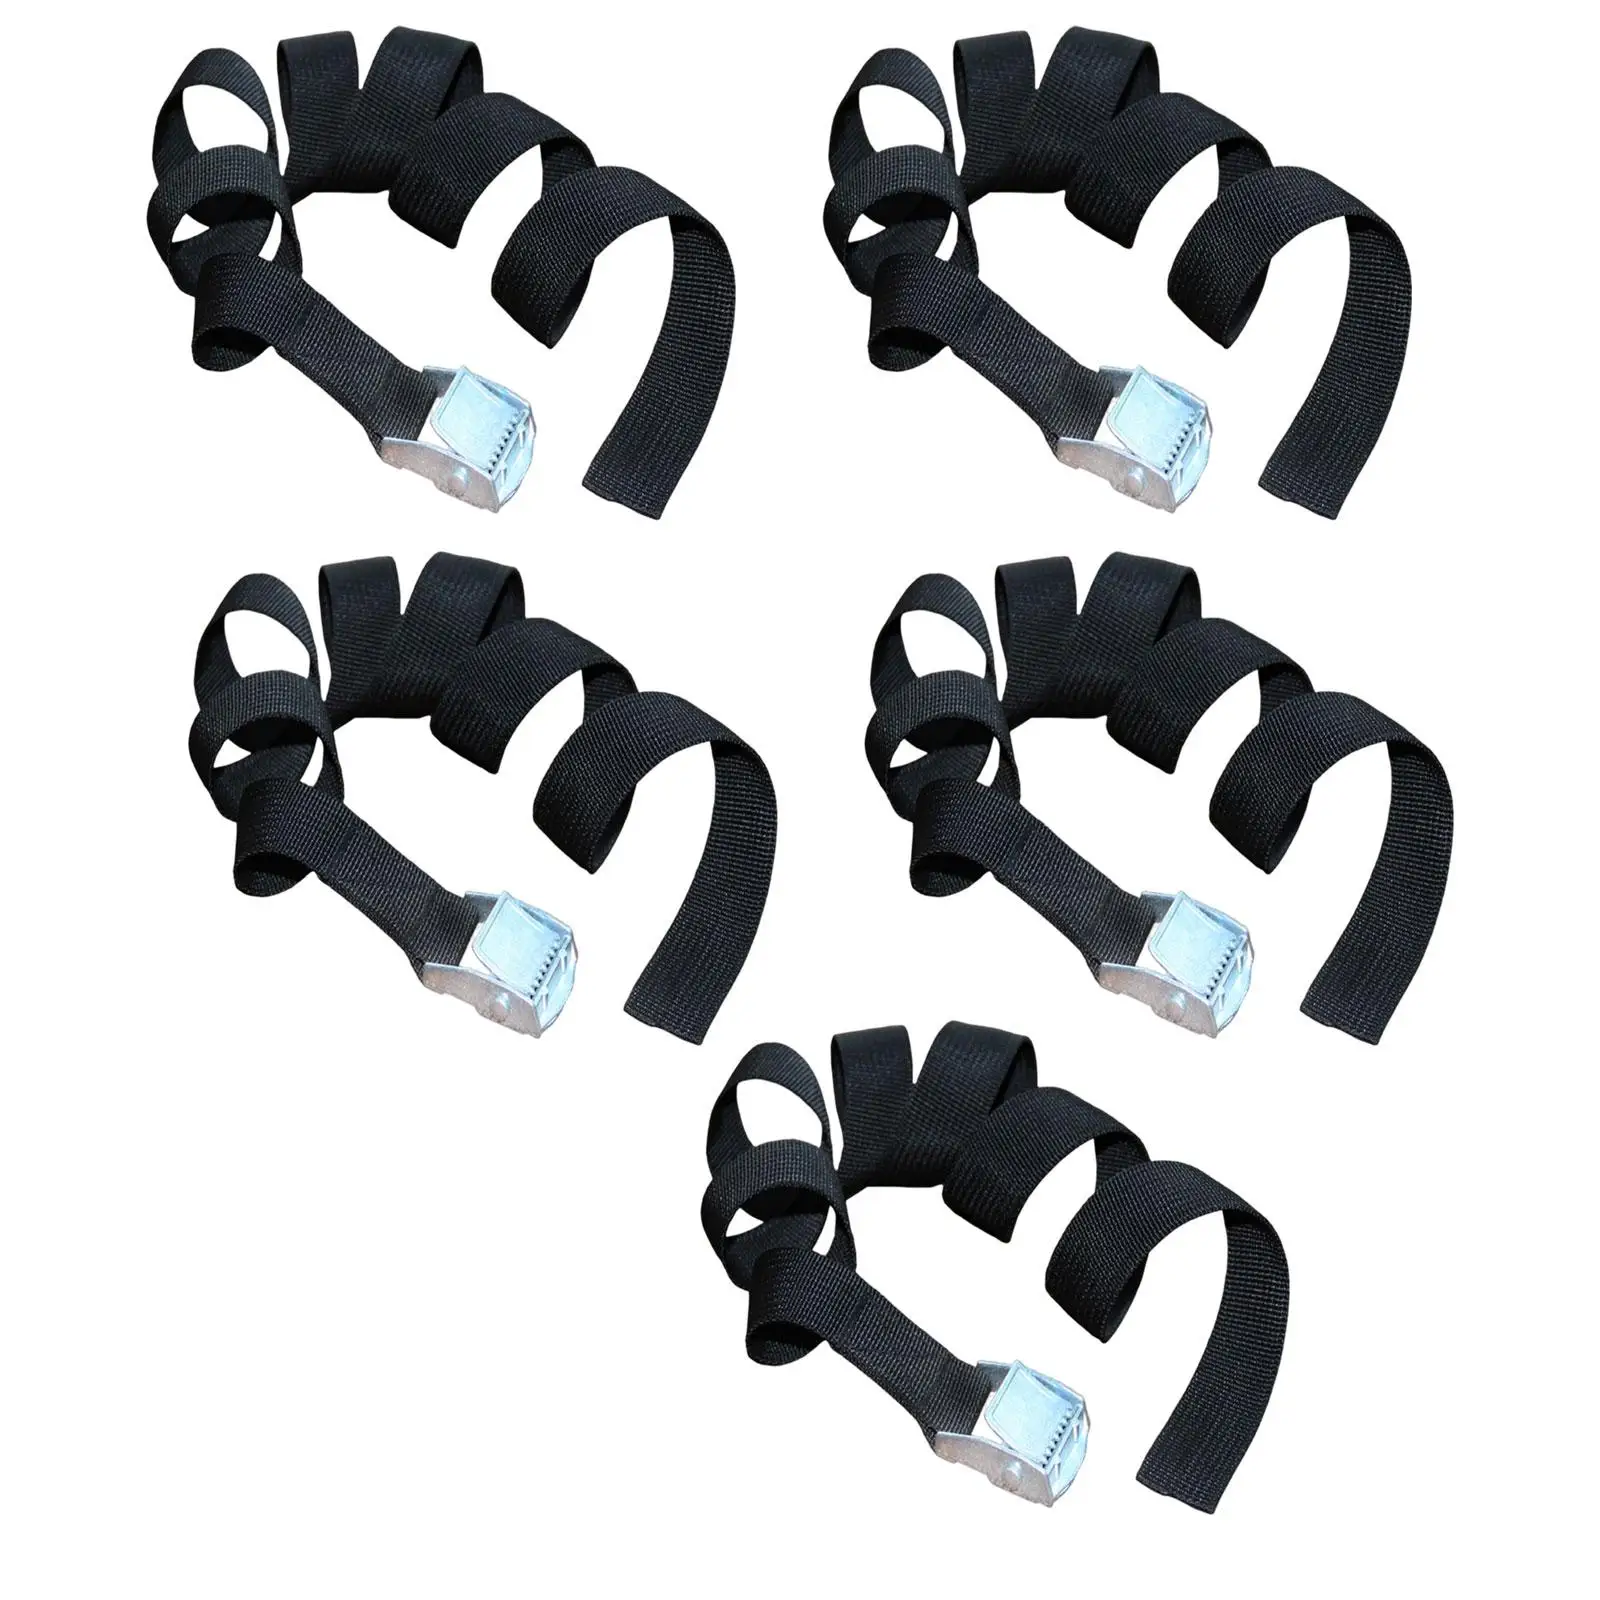 5Pcs Tie Down Strap with Buckle Lashing Straps Tensioning Belt Tensioner Rope